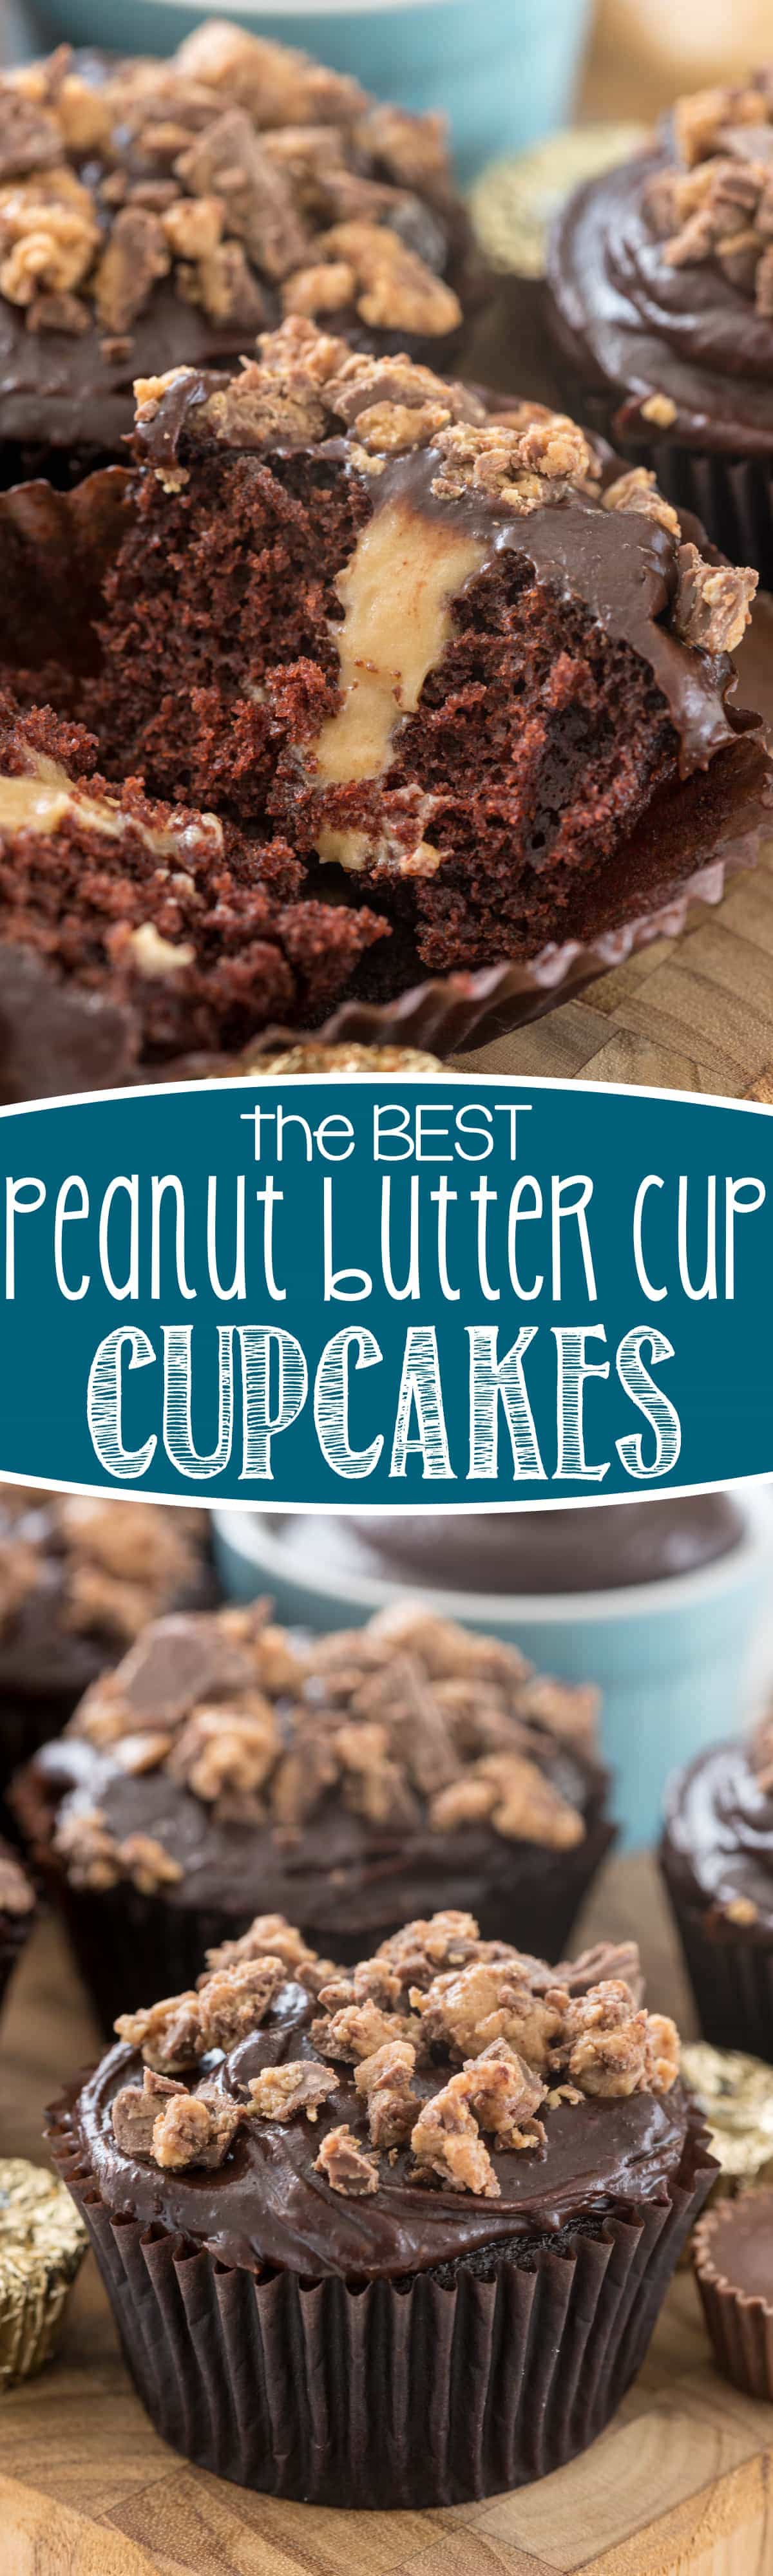 Peanut Butter Cup Cupcakes - this EASY chocolate cupcake recipe has the BEST chocolate frosting and a peanut butter filling that's to die for. EVERYONE loved these cupcakes!